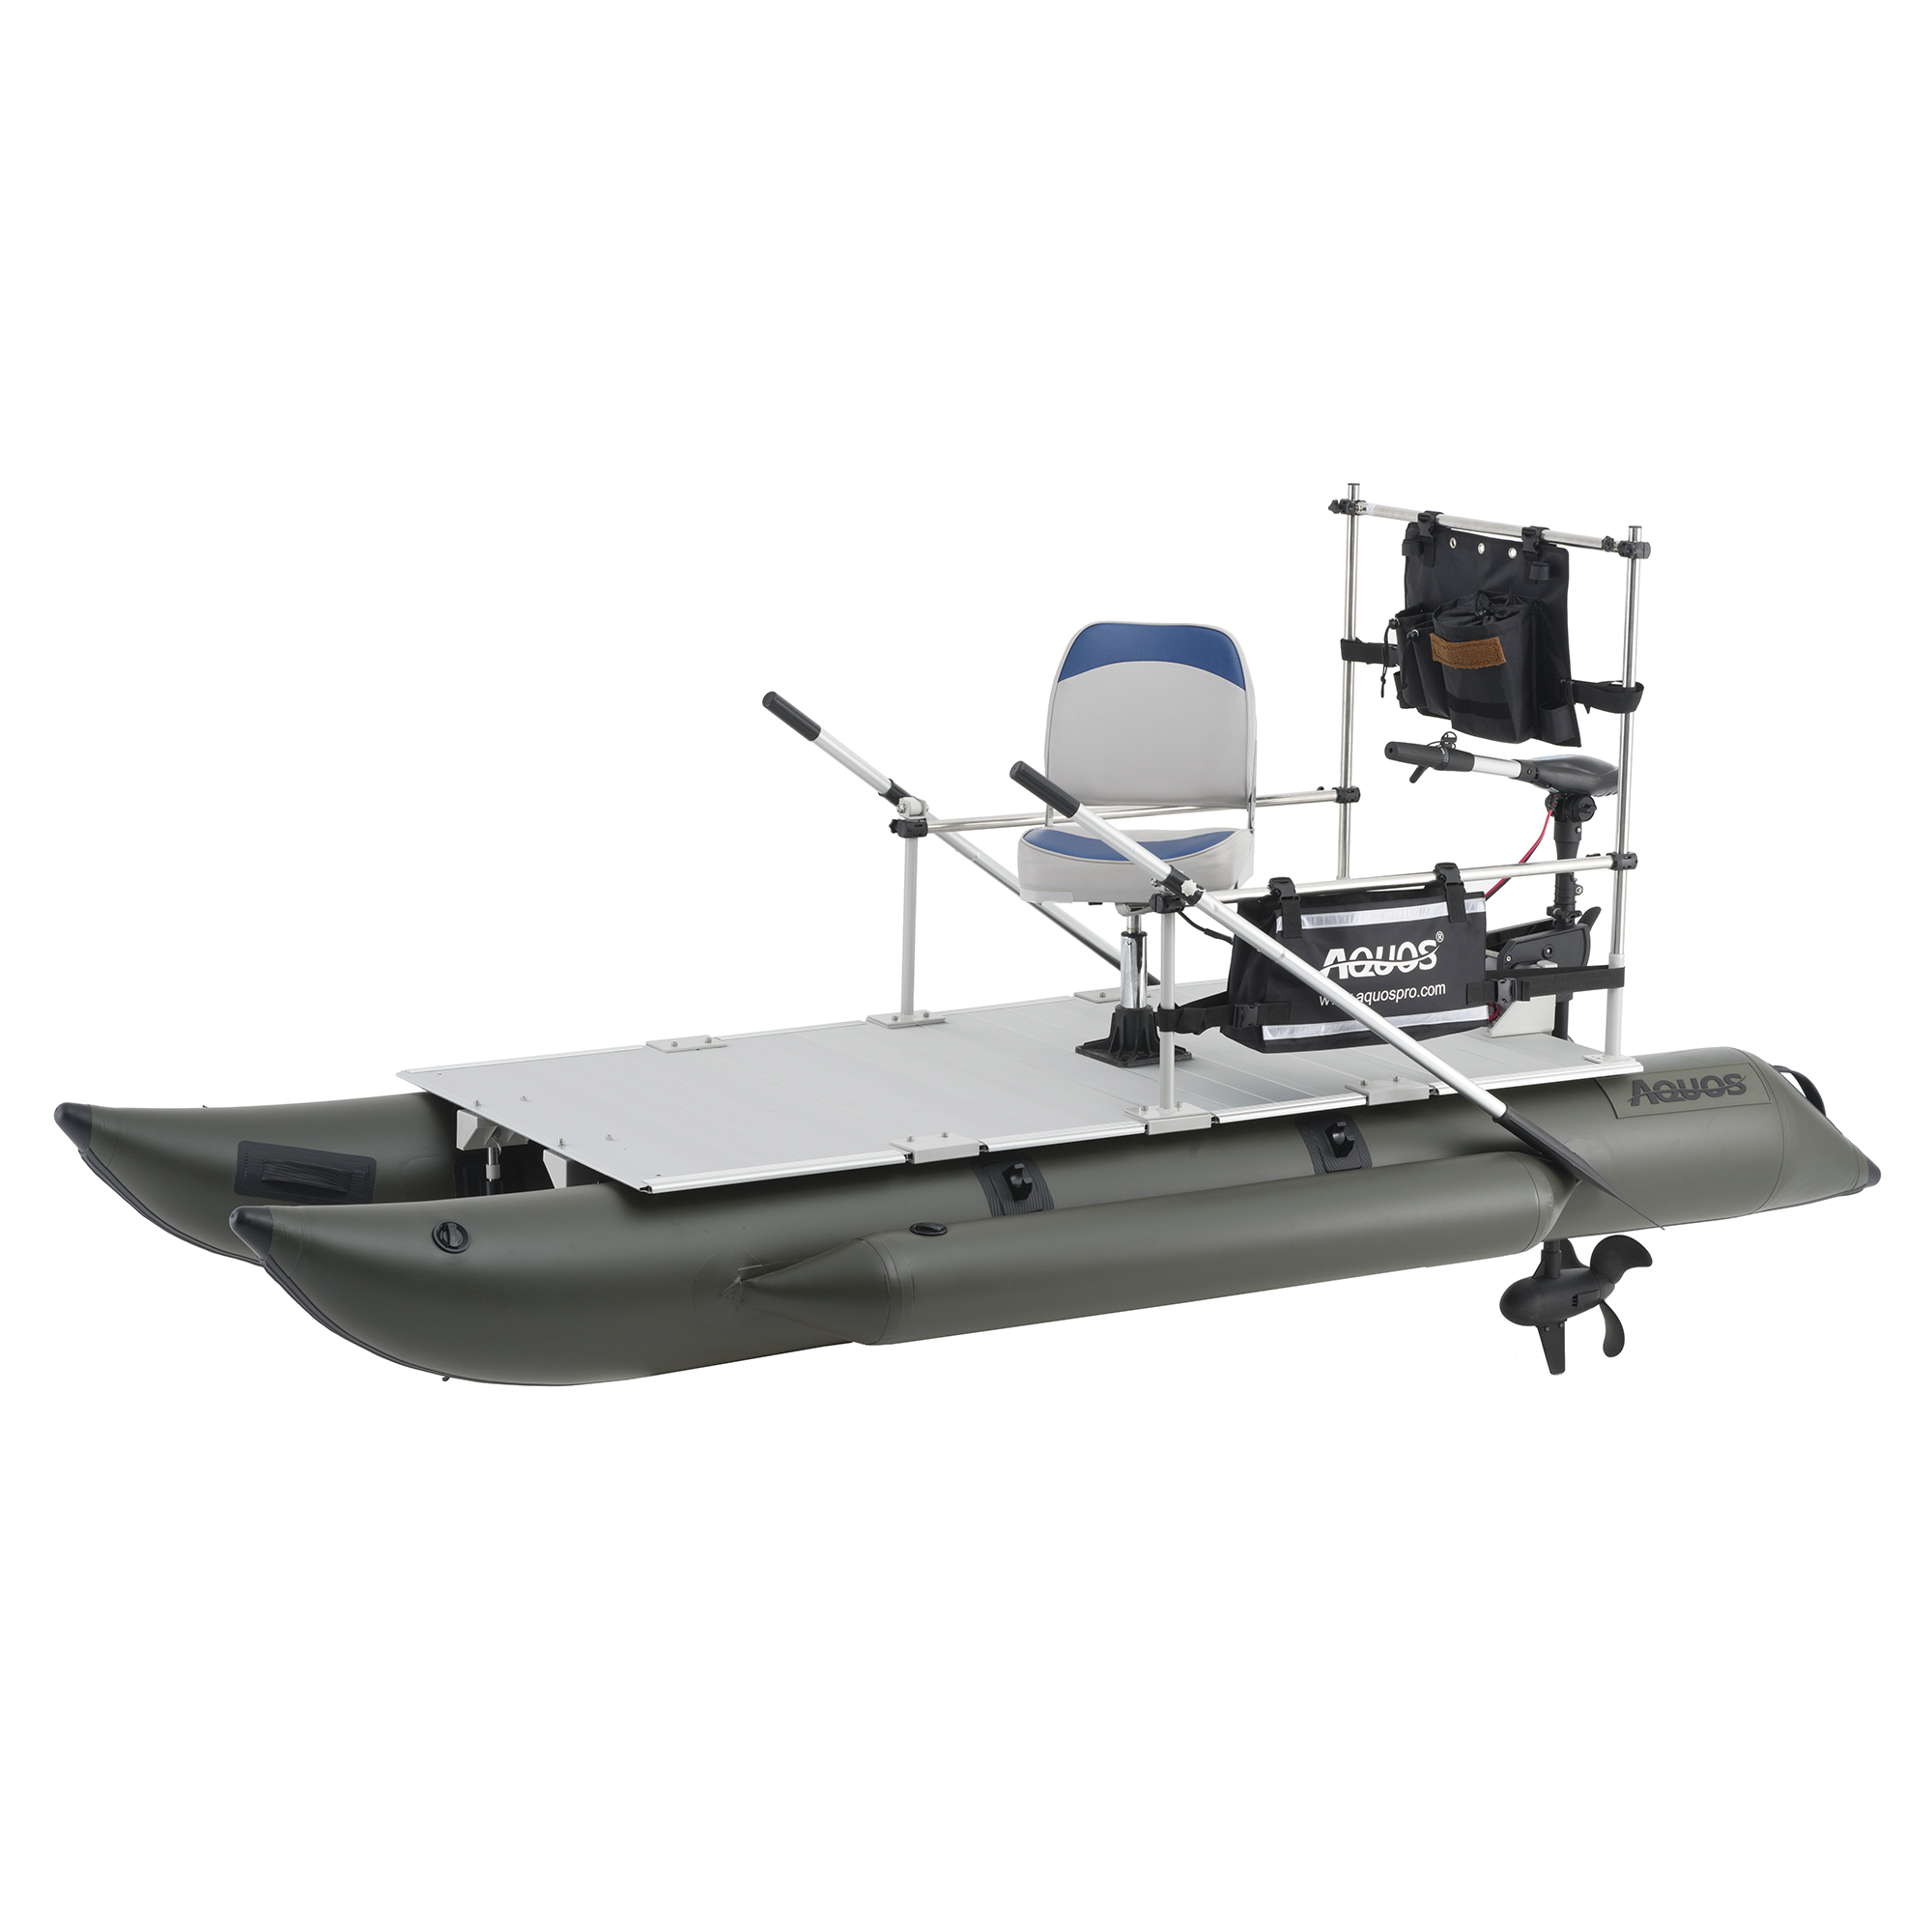 AQUOS New Heavy-Duty for Two Series 11.5 ft Inflatable Pontoon Boat with Haswing 24V 130lbs Transom Hand Control Trolling Motor